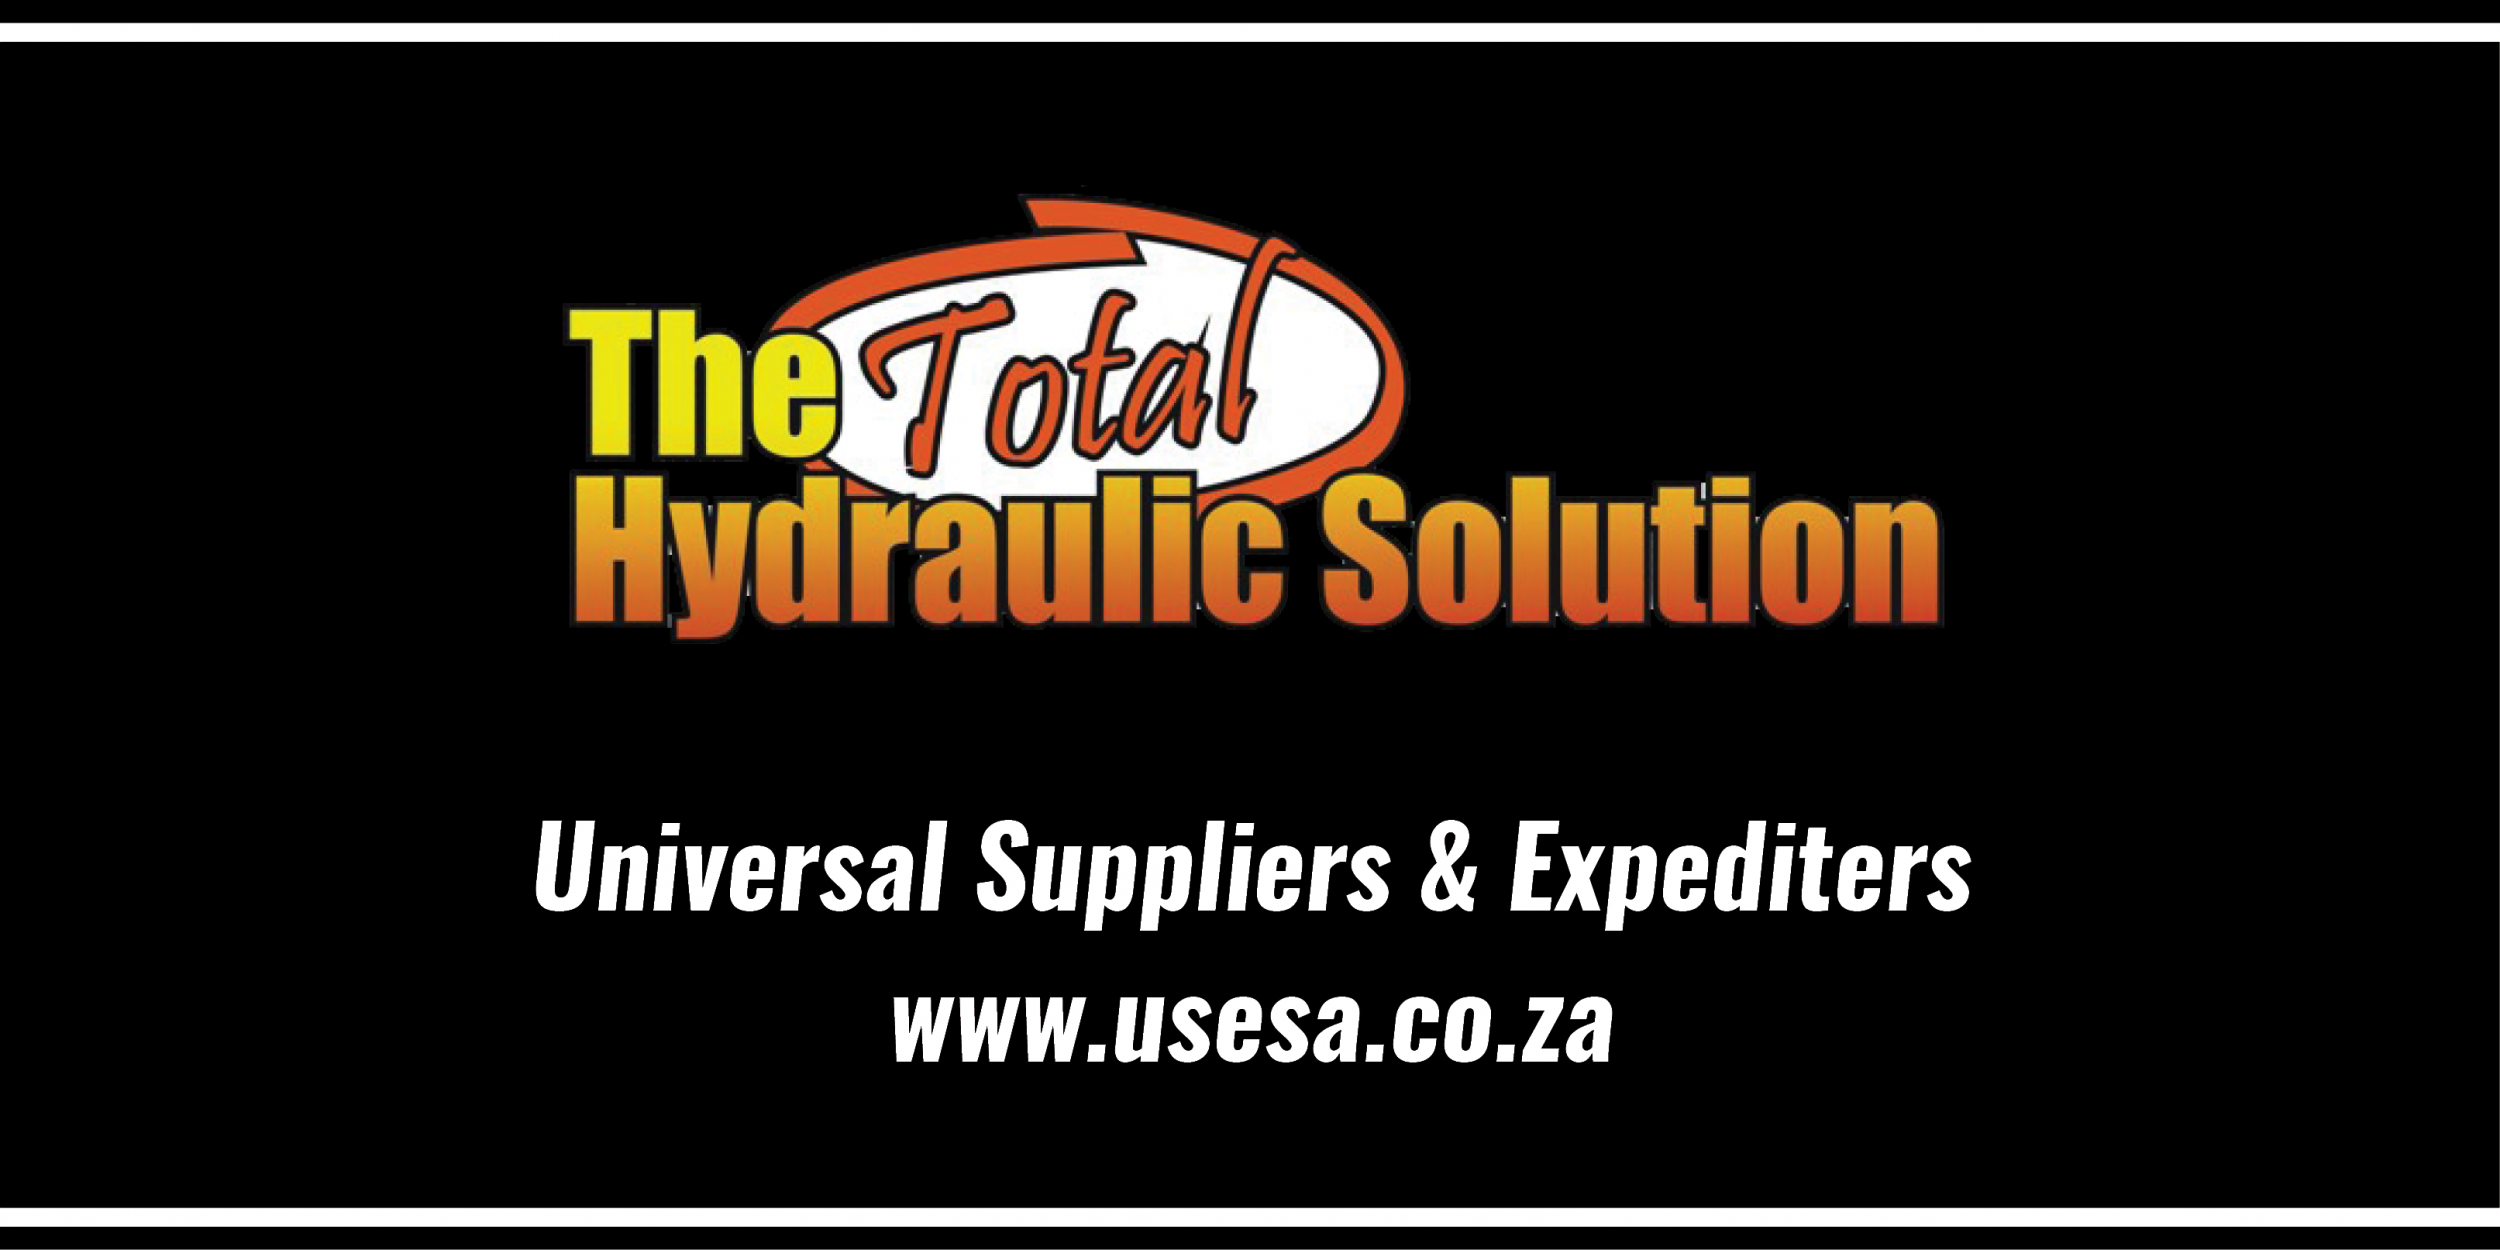 Universal Suppliers & Expediters